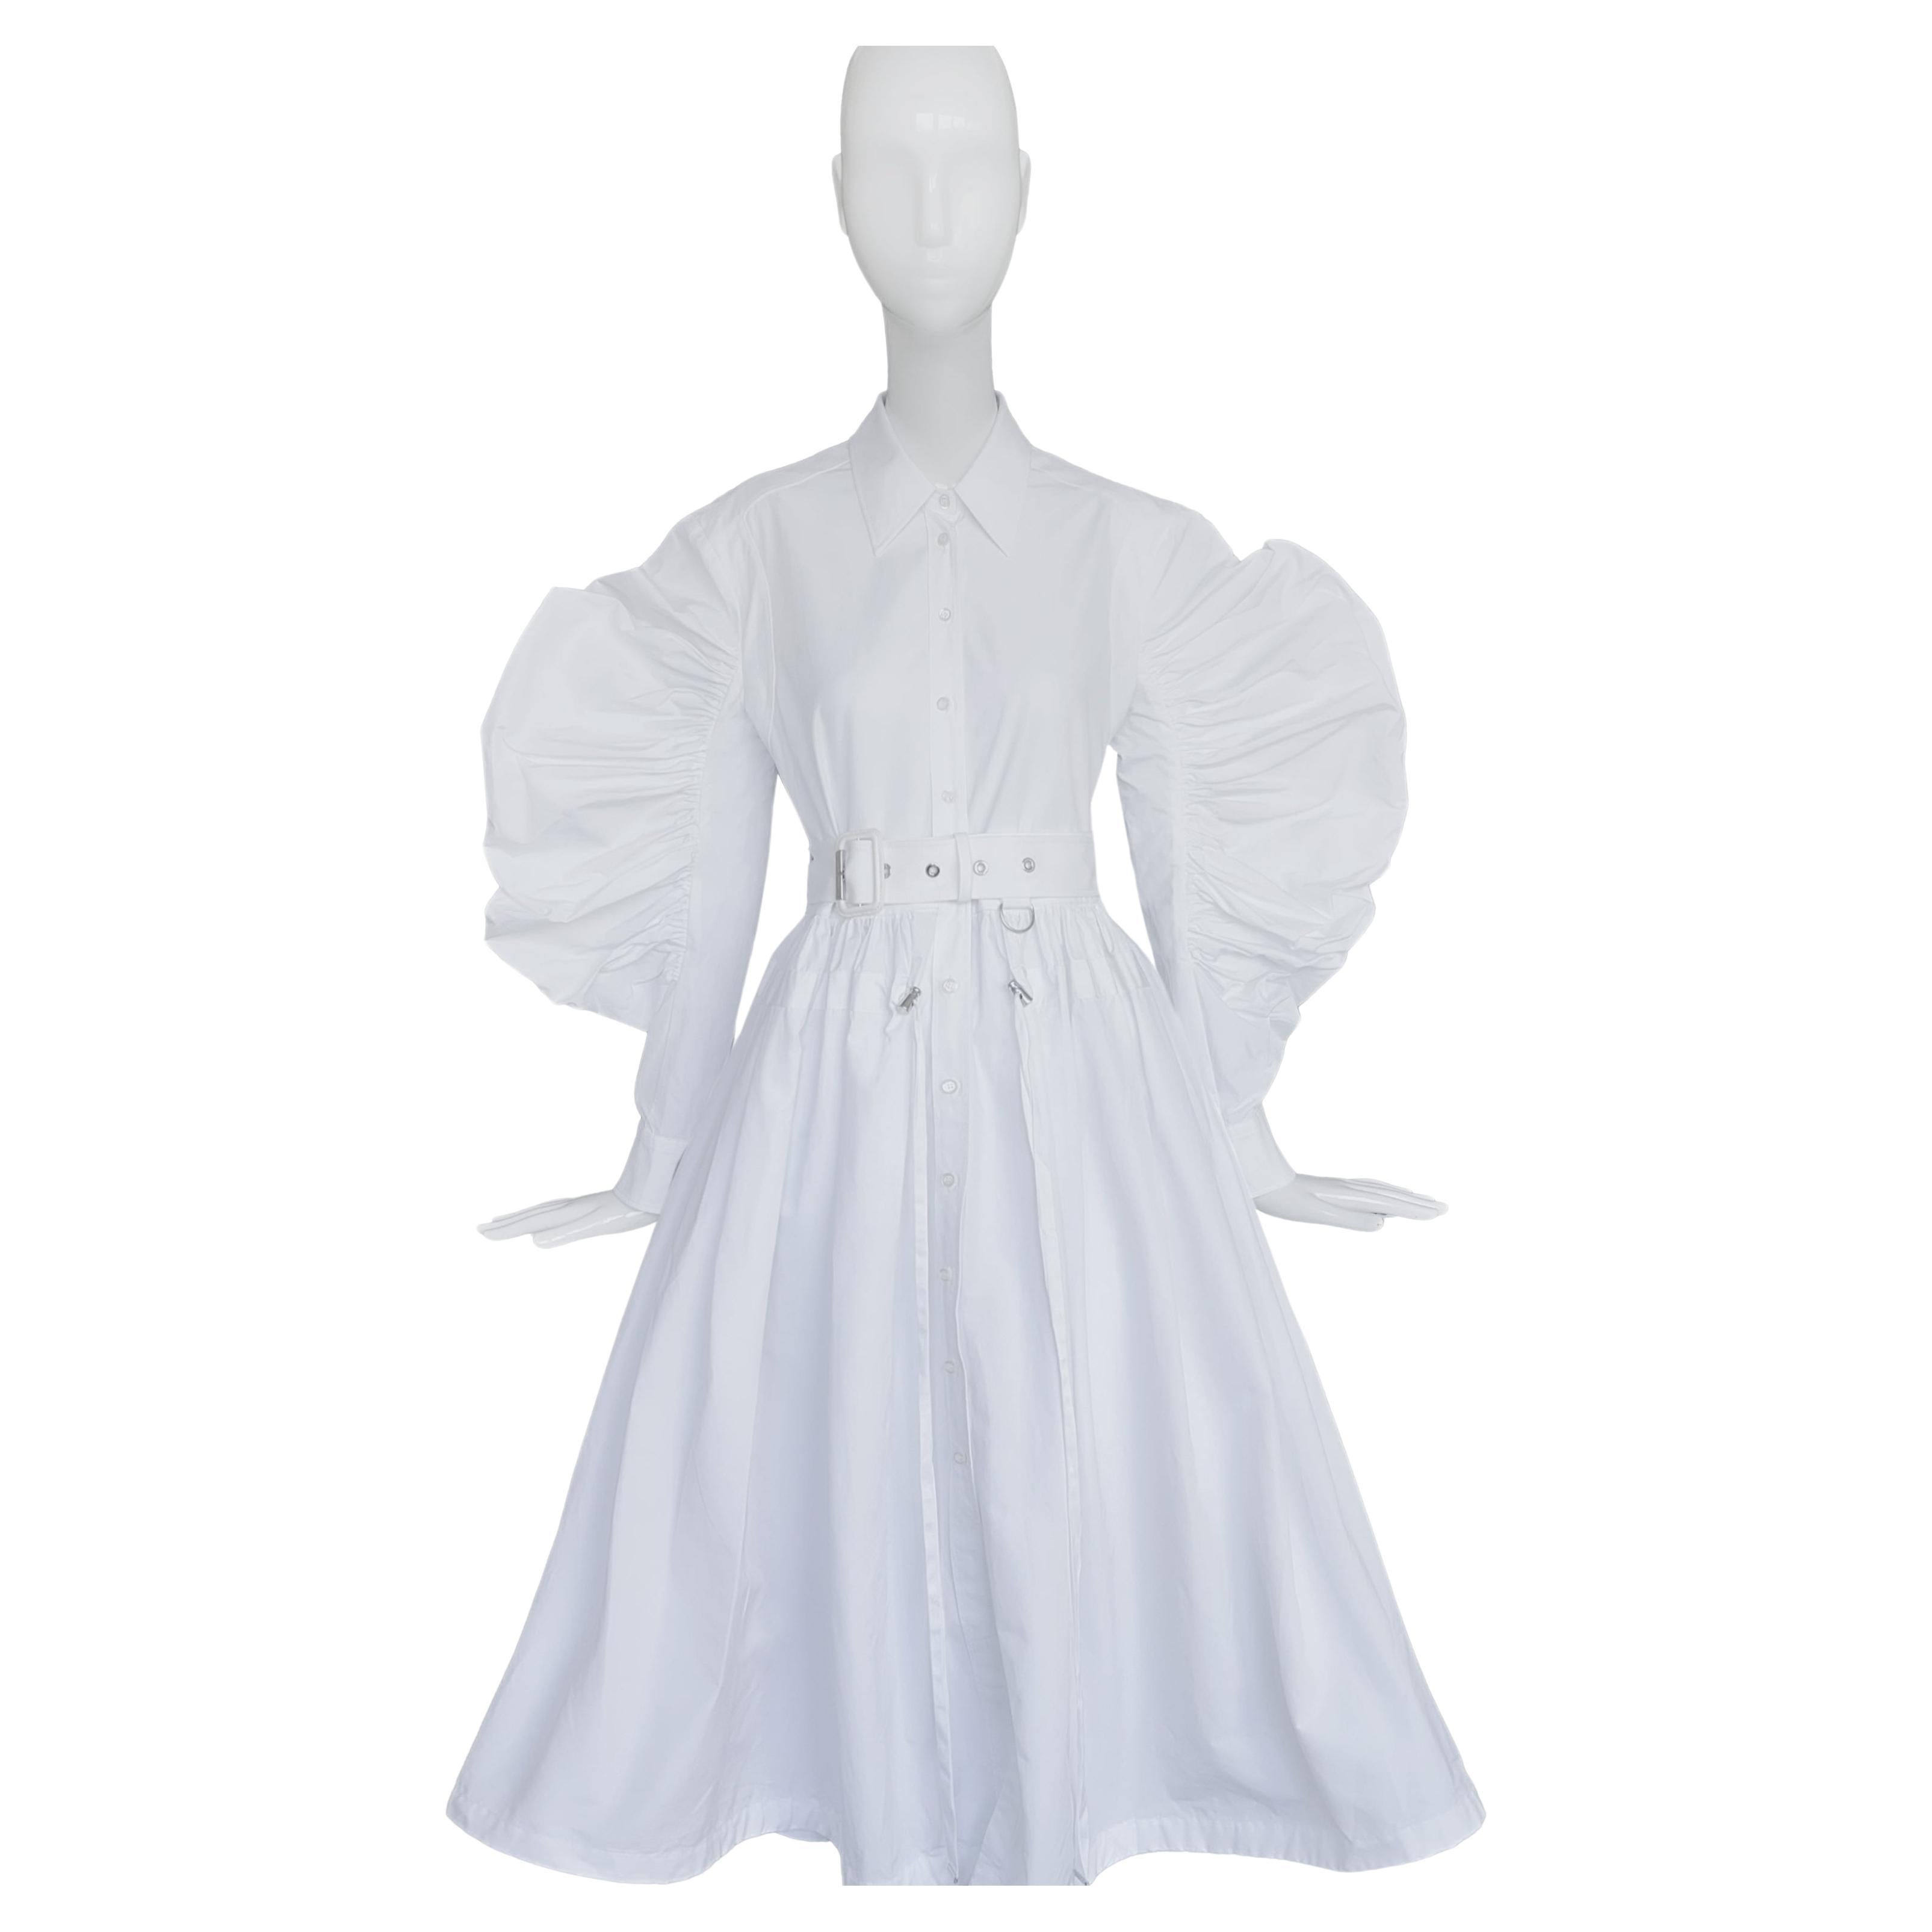 Alexander McQueen Dress SS 2021 Dramatic Sleeve White For Sale